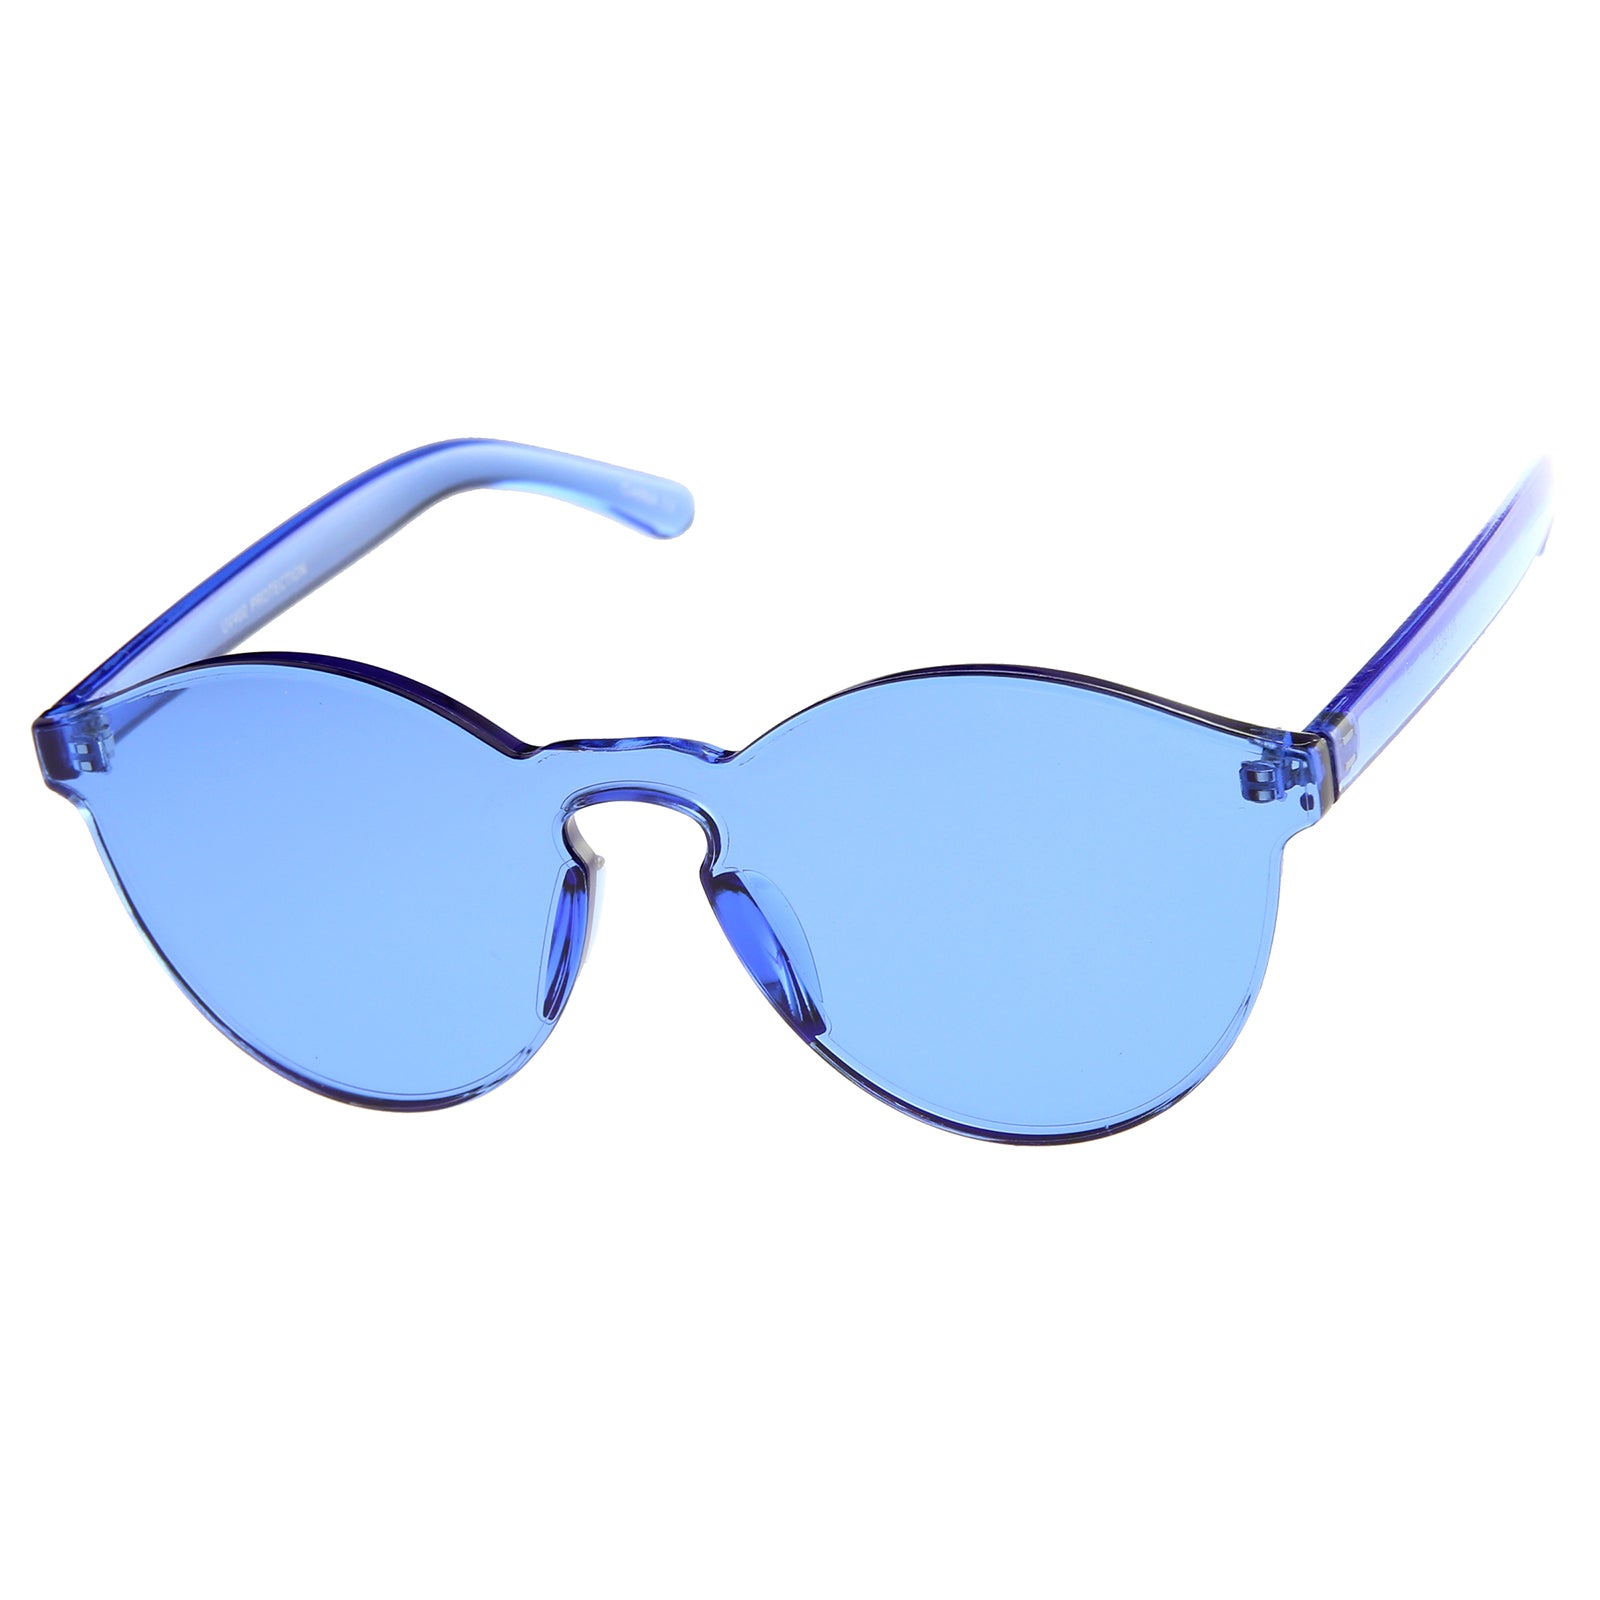 Best Mirrored One Piece Lens Sunglasses for Women UV Protection